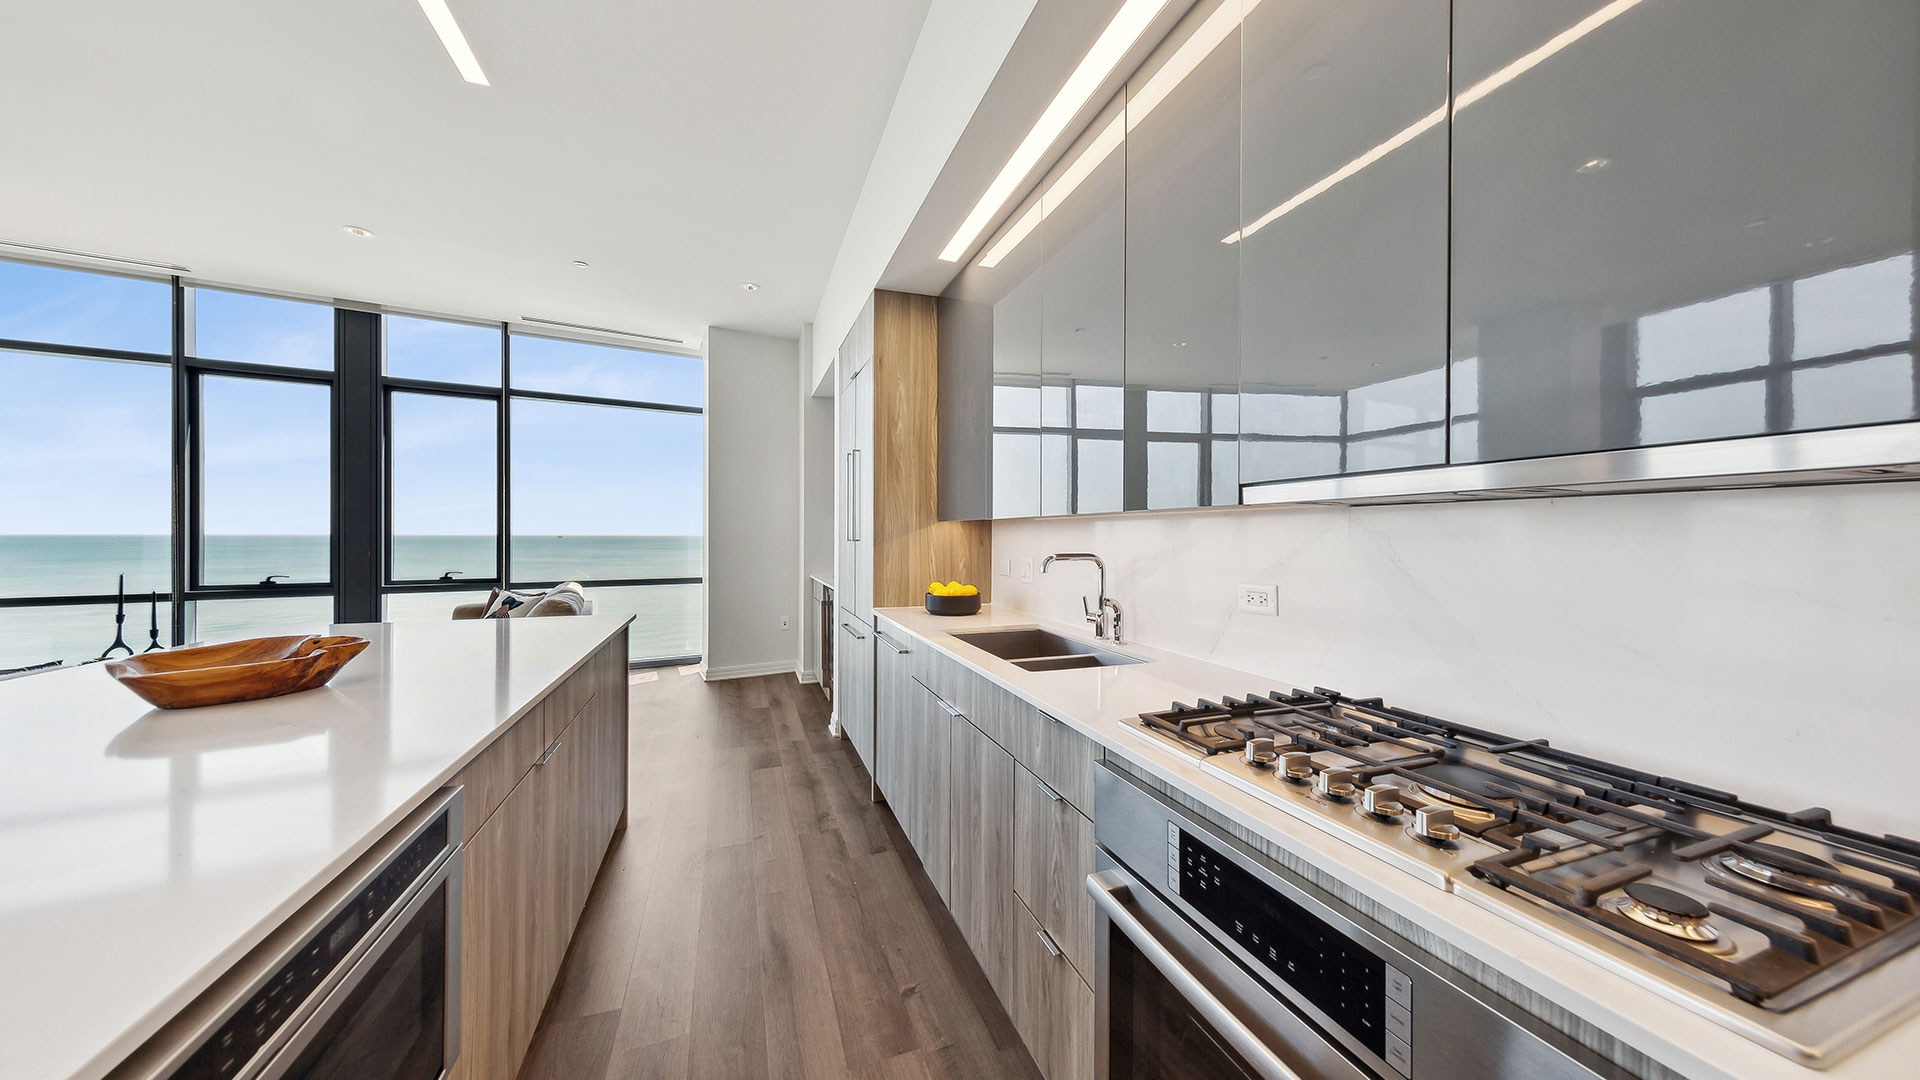 A modern kitchen with stainless steel appliances, an island, and a view of the ocean through large windows.